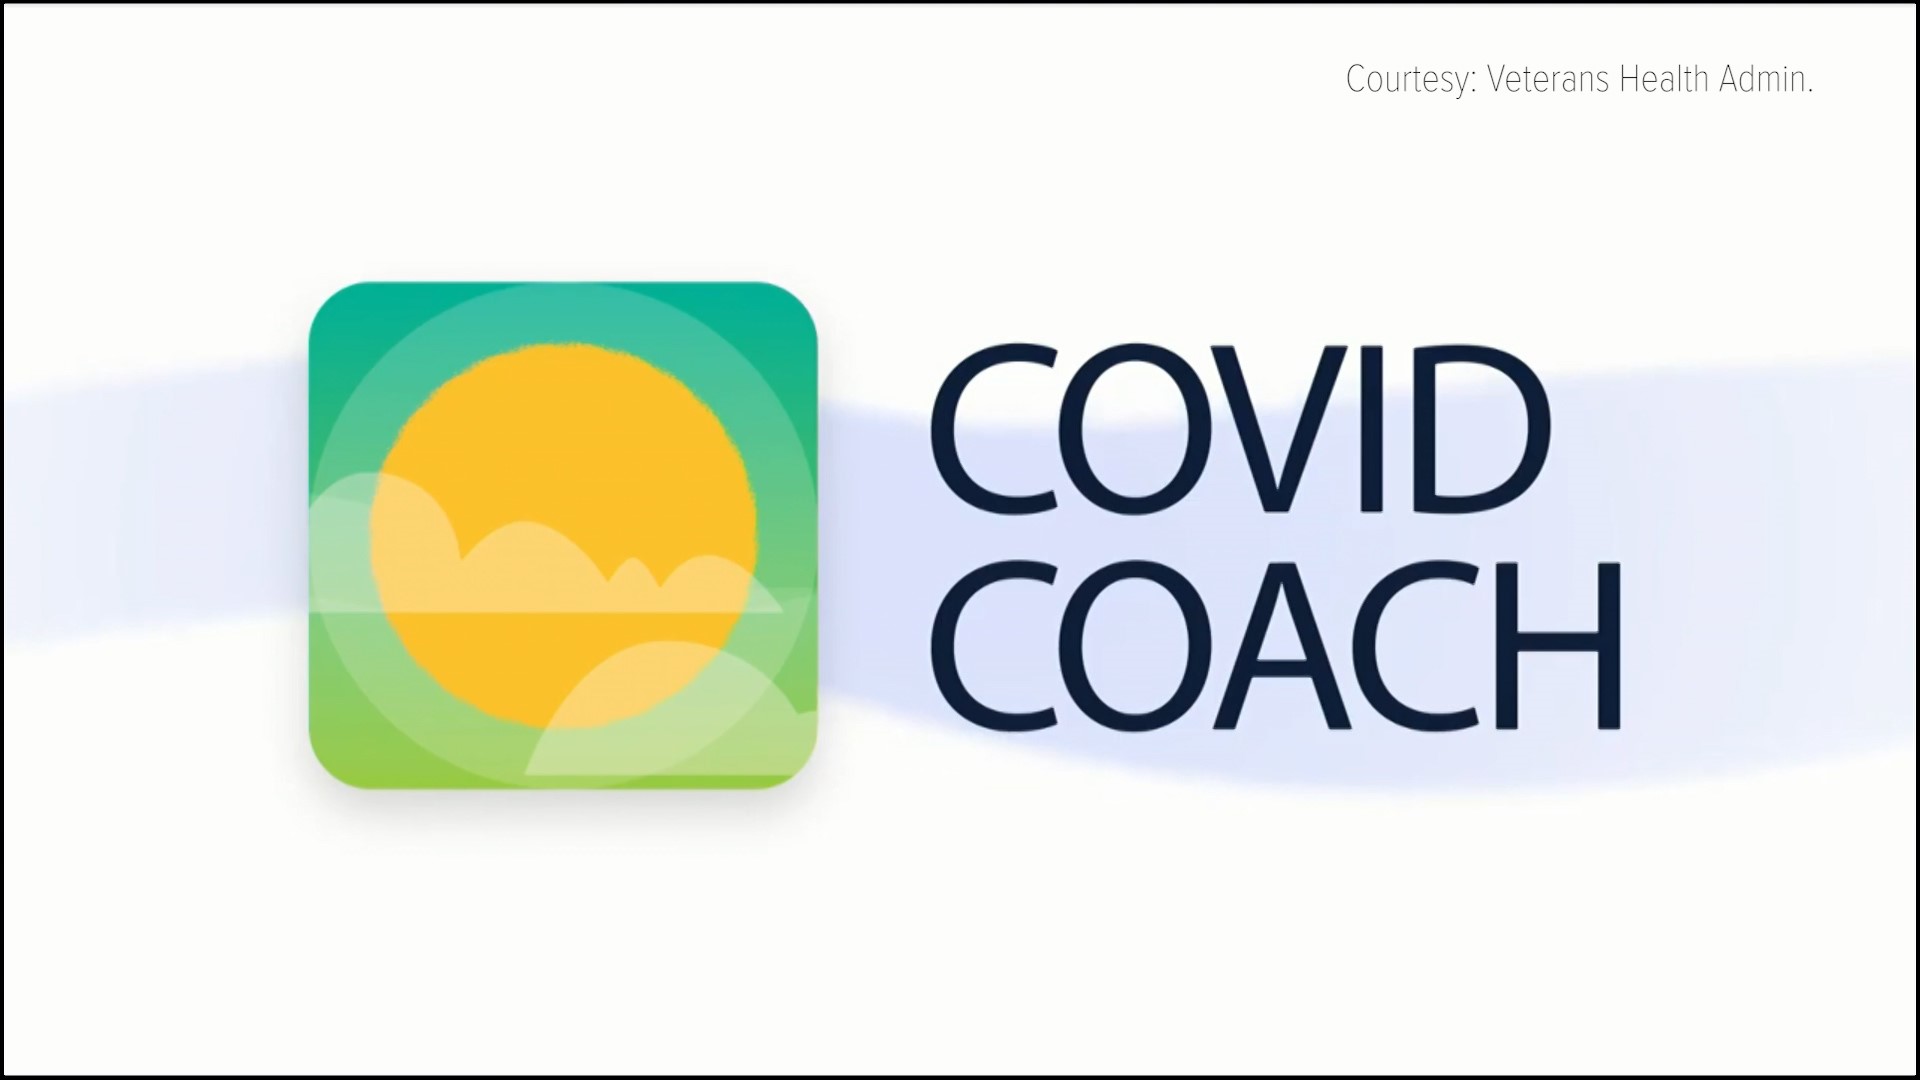 "COVID Coach" was developed by a team of psychologists working with the Veterans Health Administration.